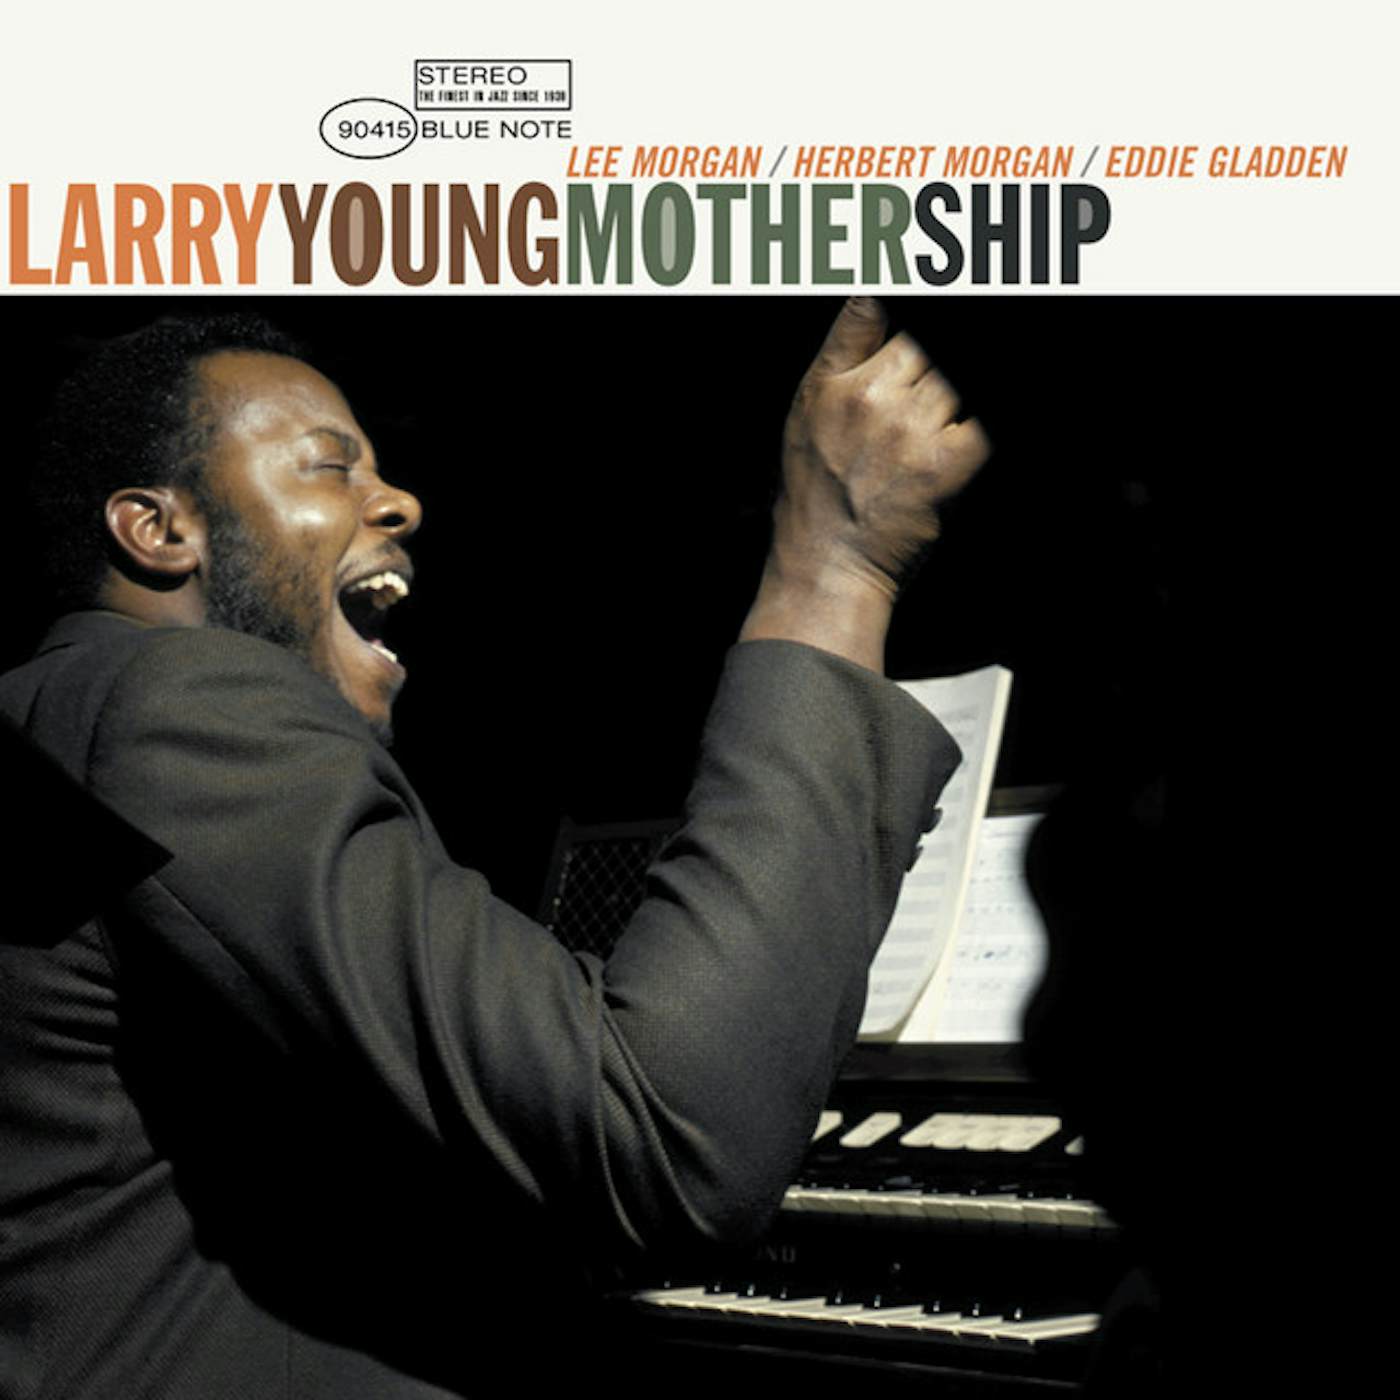 Larry Young MOTHER SHIP CD